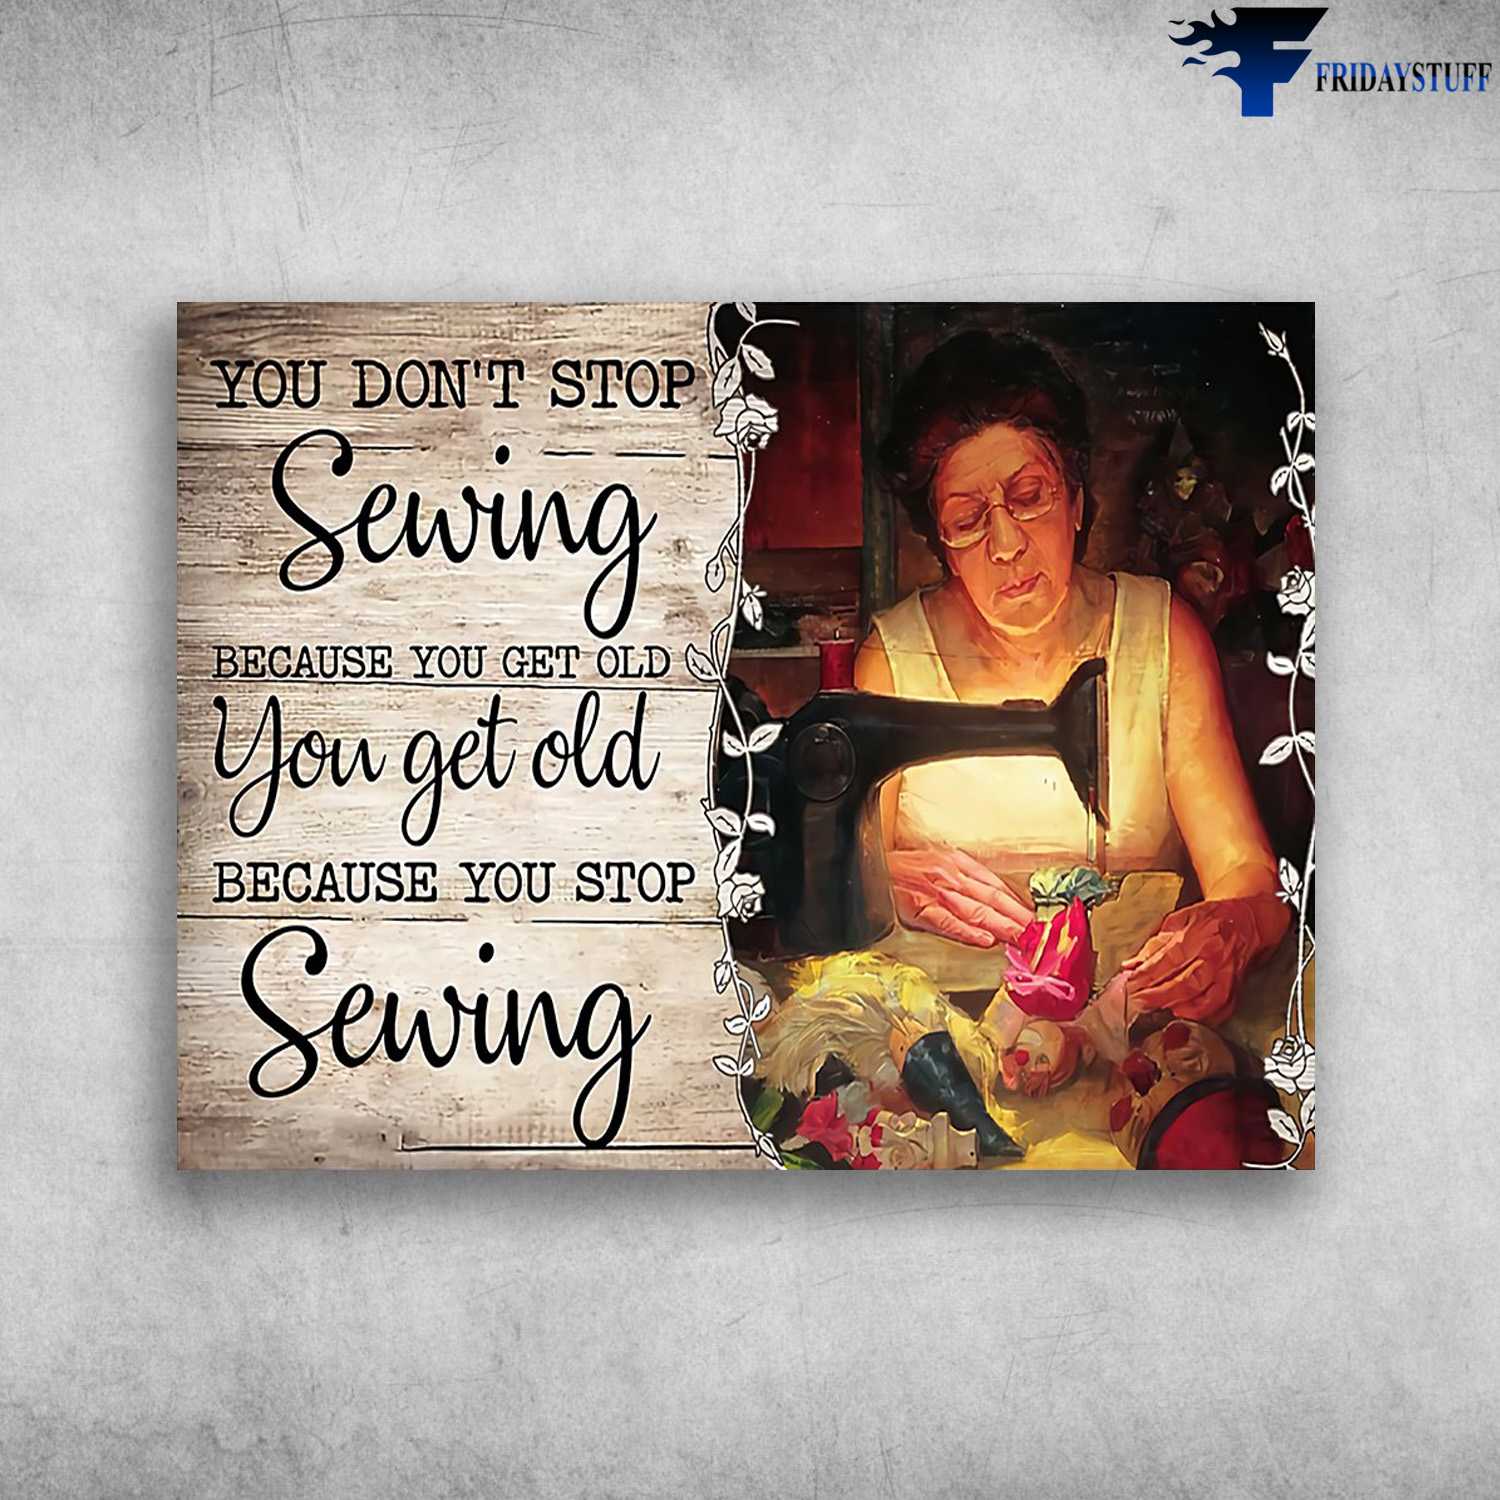 Sewing Woman, Tailor's Gift - You Don't Stop Sewing, Because You Get Old, You Get Old When You Stop Sewing